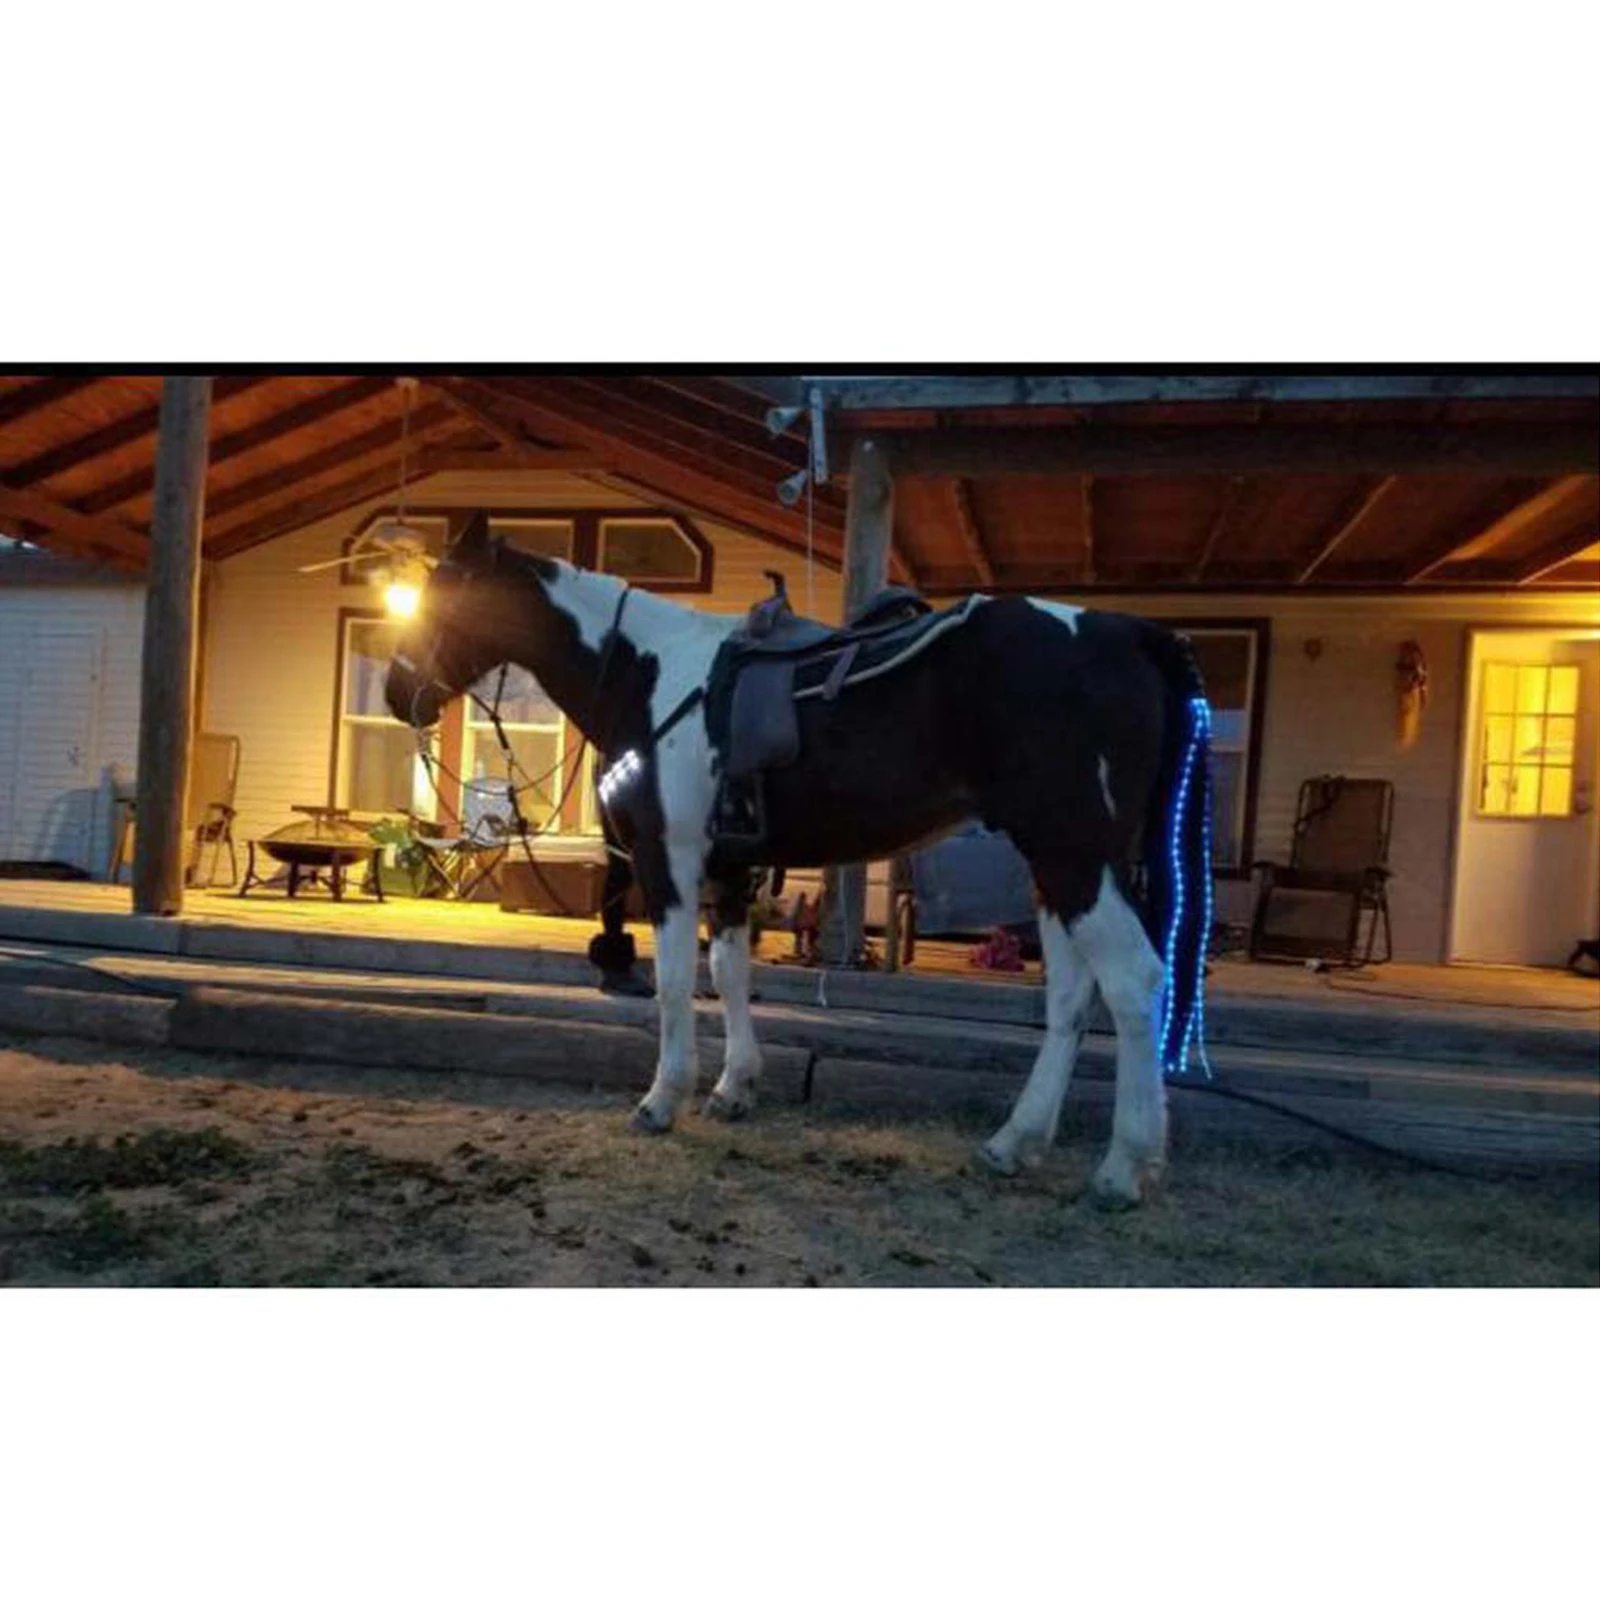 LED Horse Tail Crupper Horse Harness 100cm Neon Lights Riding Visible Lamp Light 